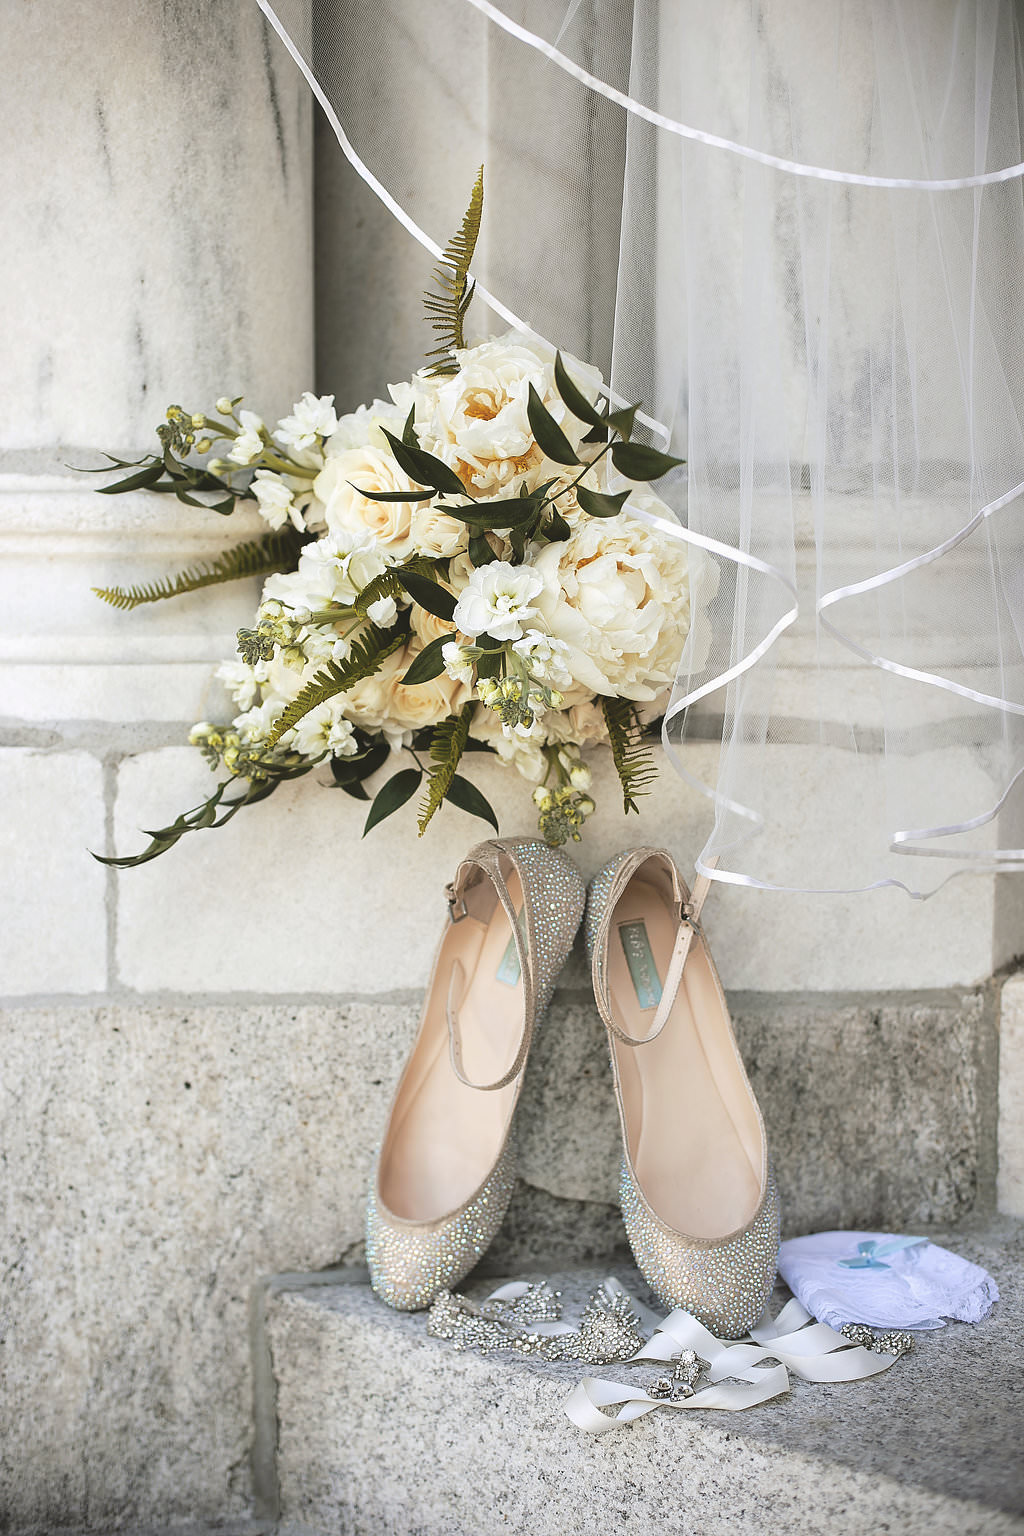 Sparkly Ballet Flat Wedding Shoes with Cream Rose and Natural Greenery Bridal Bouquet